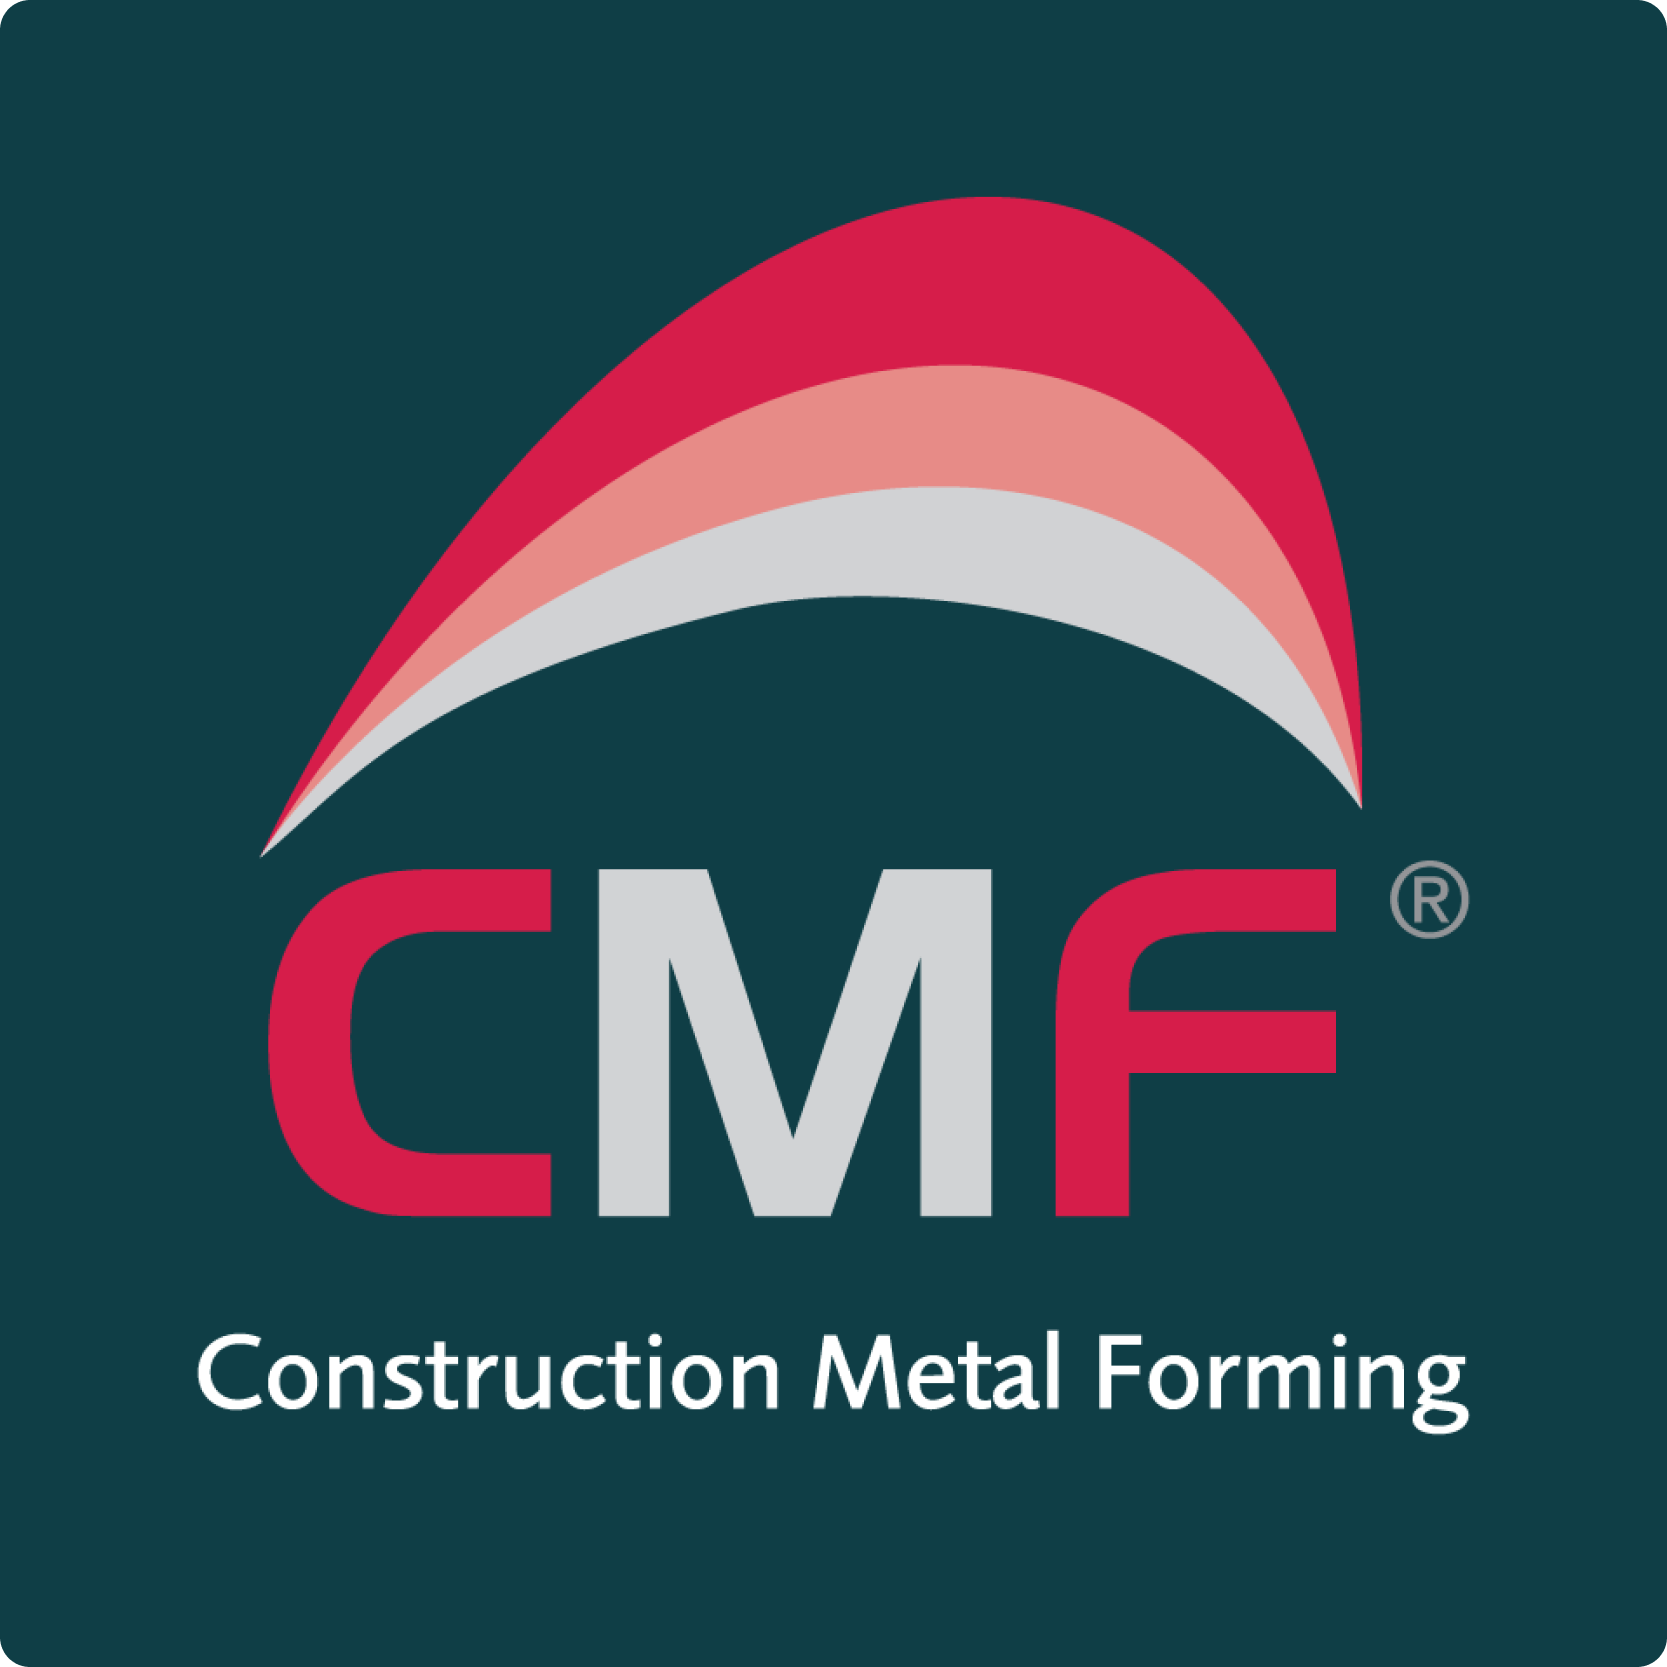 Construction Metal Forming